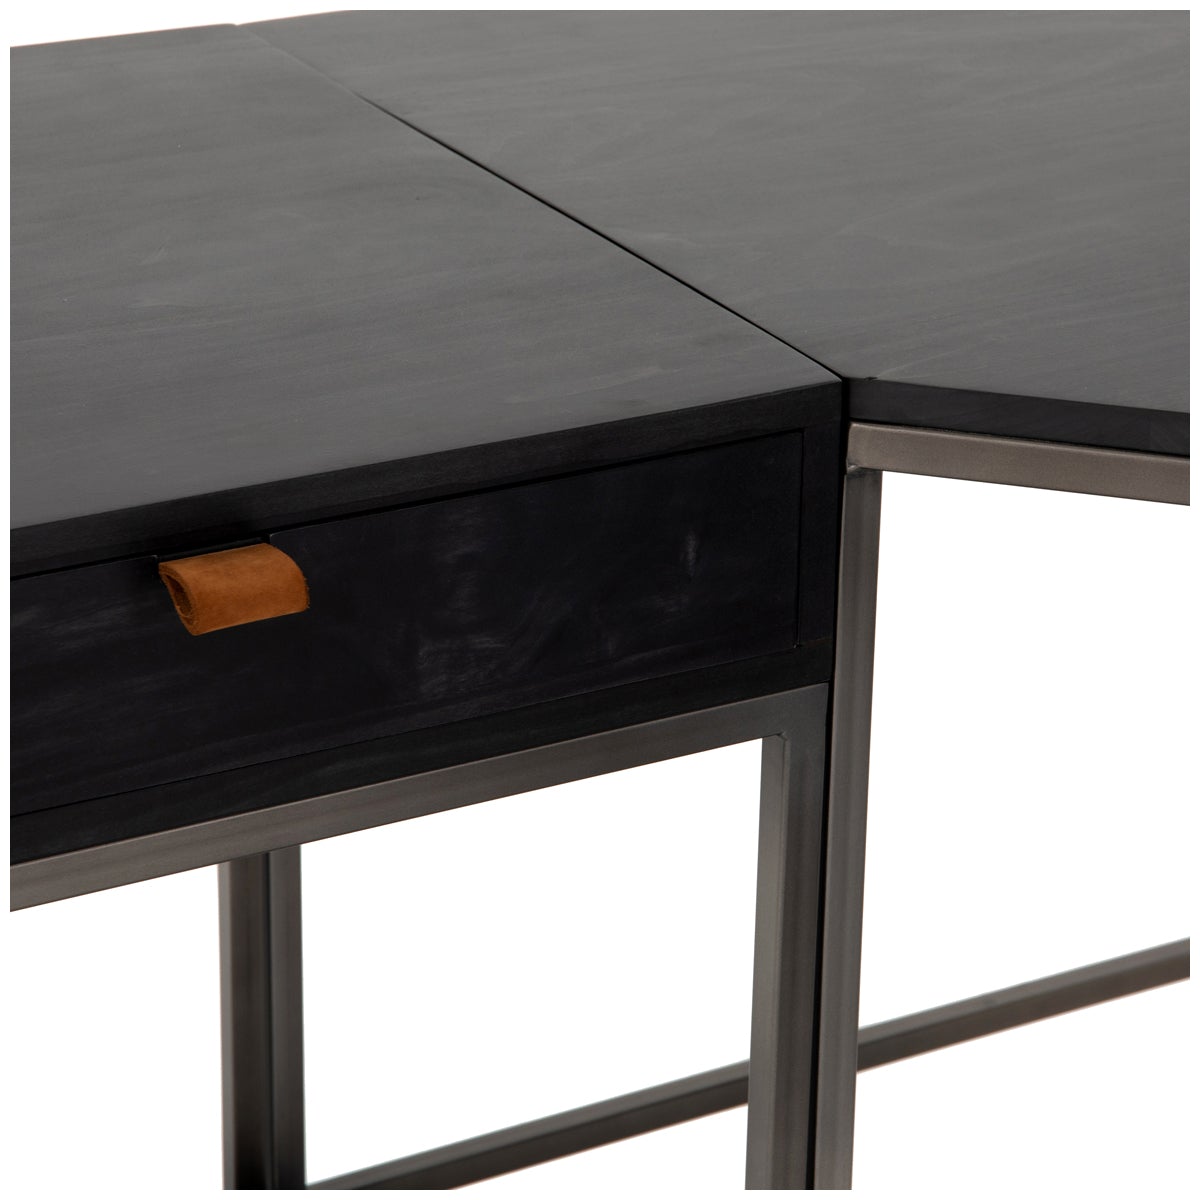 Four Hands Fulton Trey Desk System with Filing Credenza